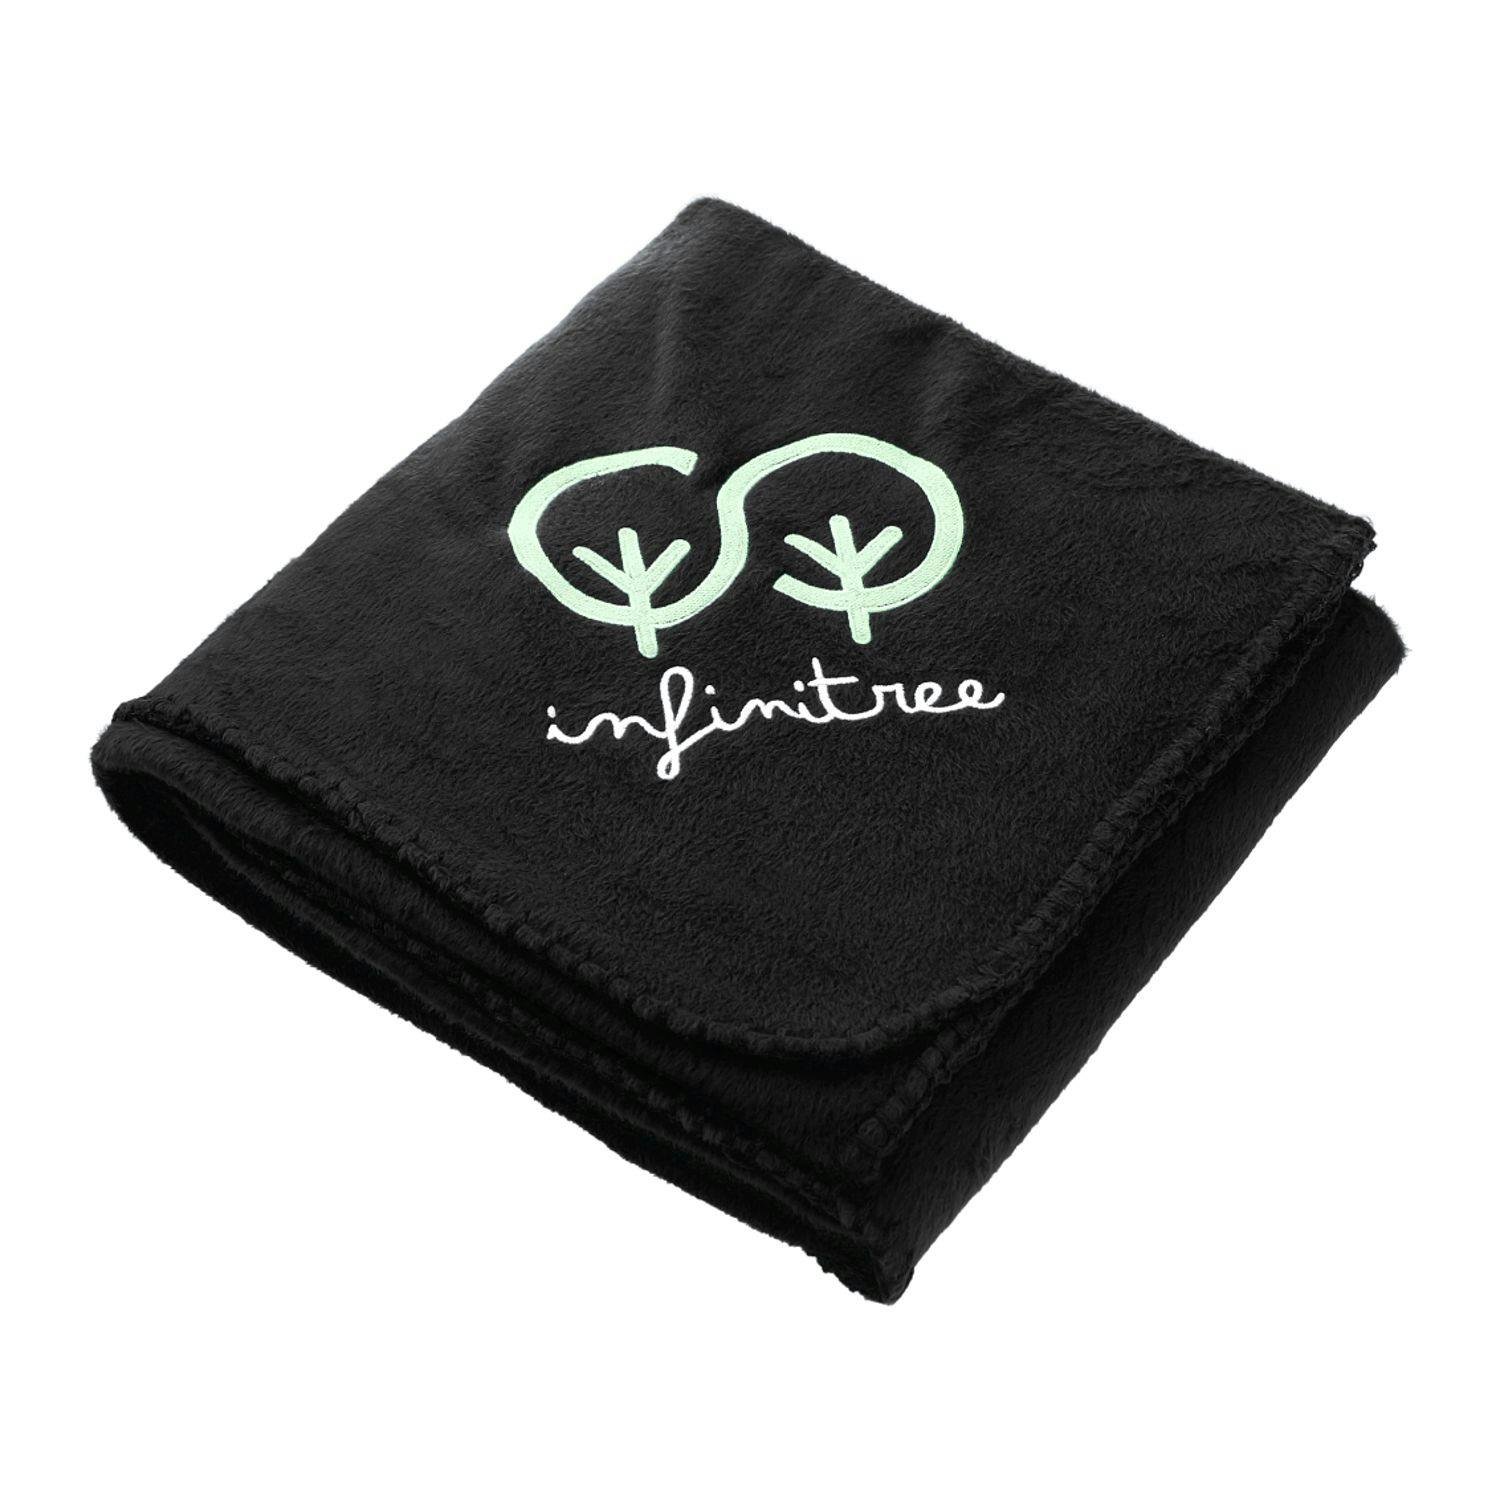 100% Recycled PET Fleece Blanket with RPET Pouch - additional Image 1